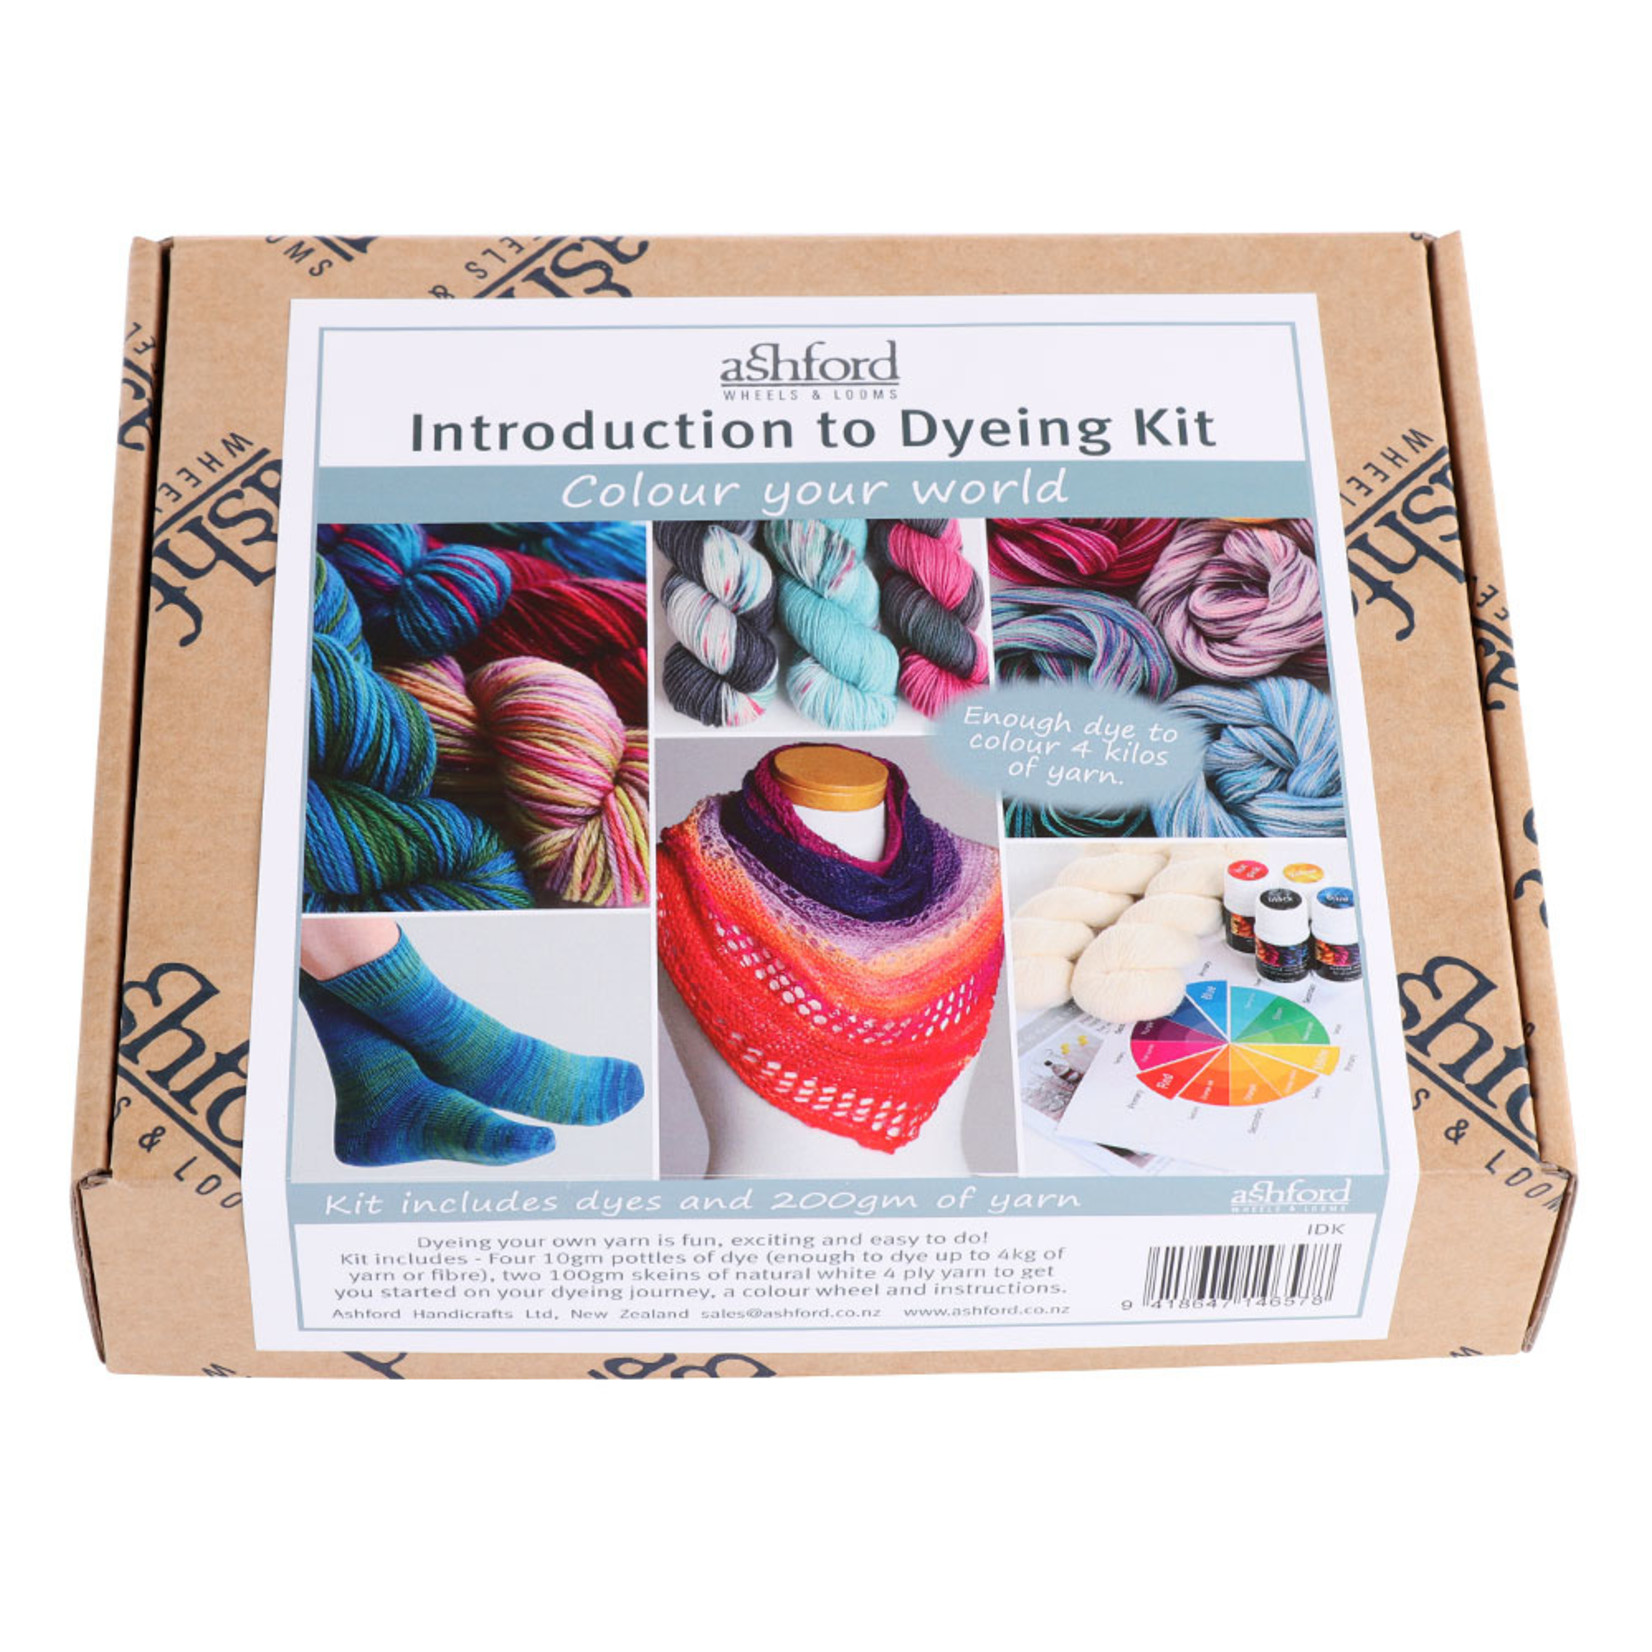 Ashford Introduction to Dyeing Kit